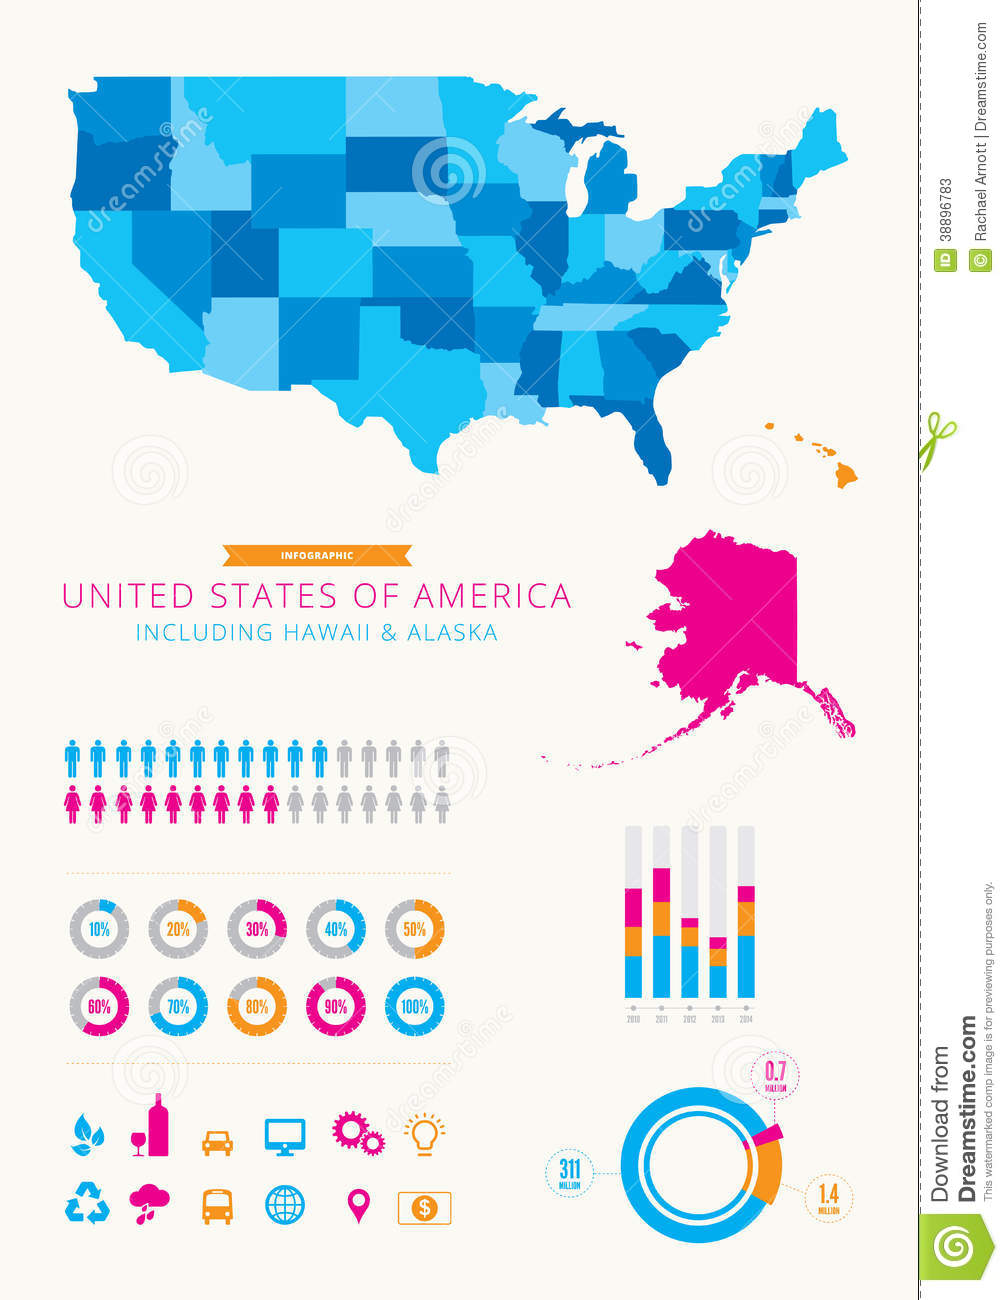 The United States of America: Mapped by Mottos - Infographic